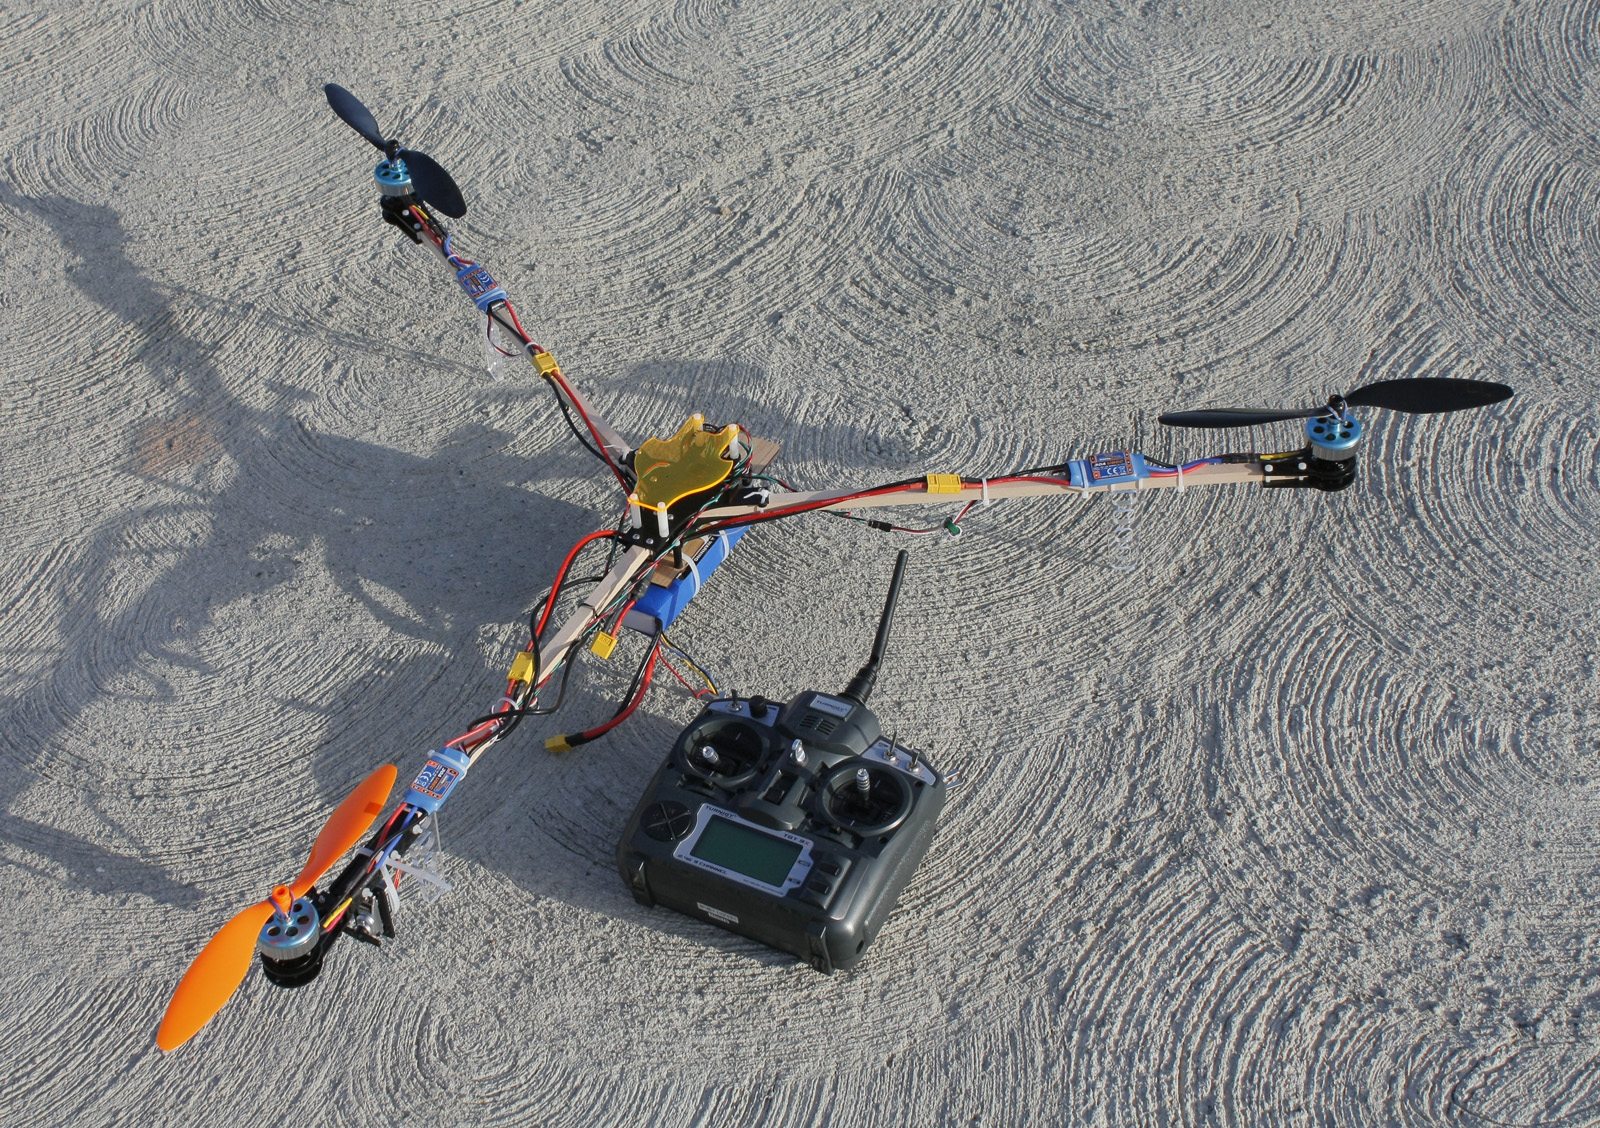 Rear-right view of the tricopter and Turnigy 9X transmitter